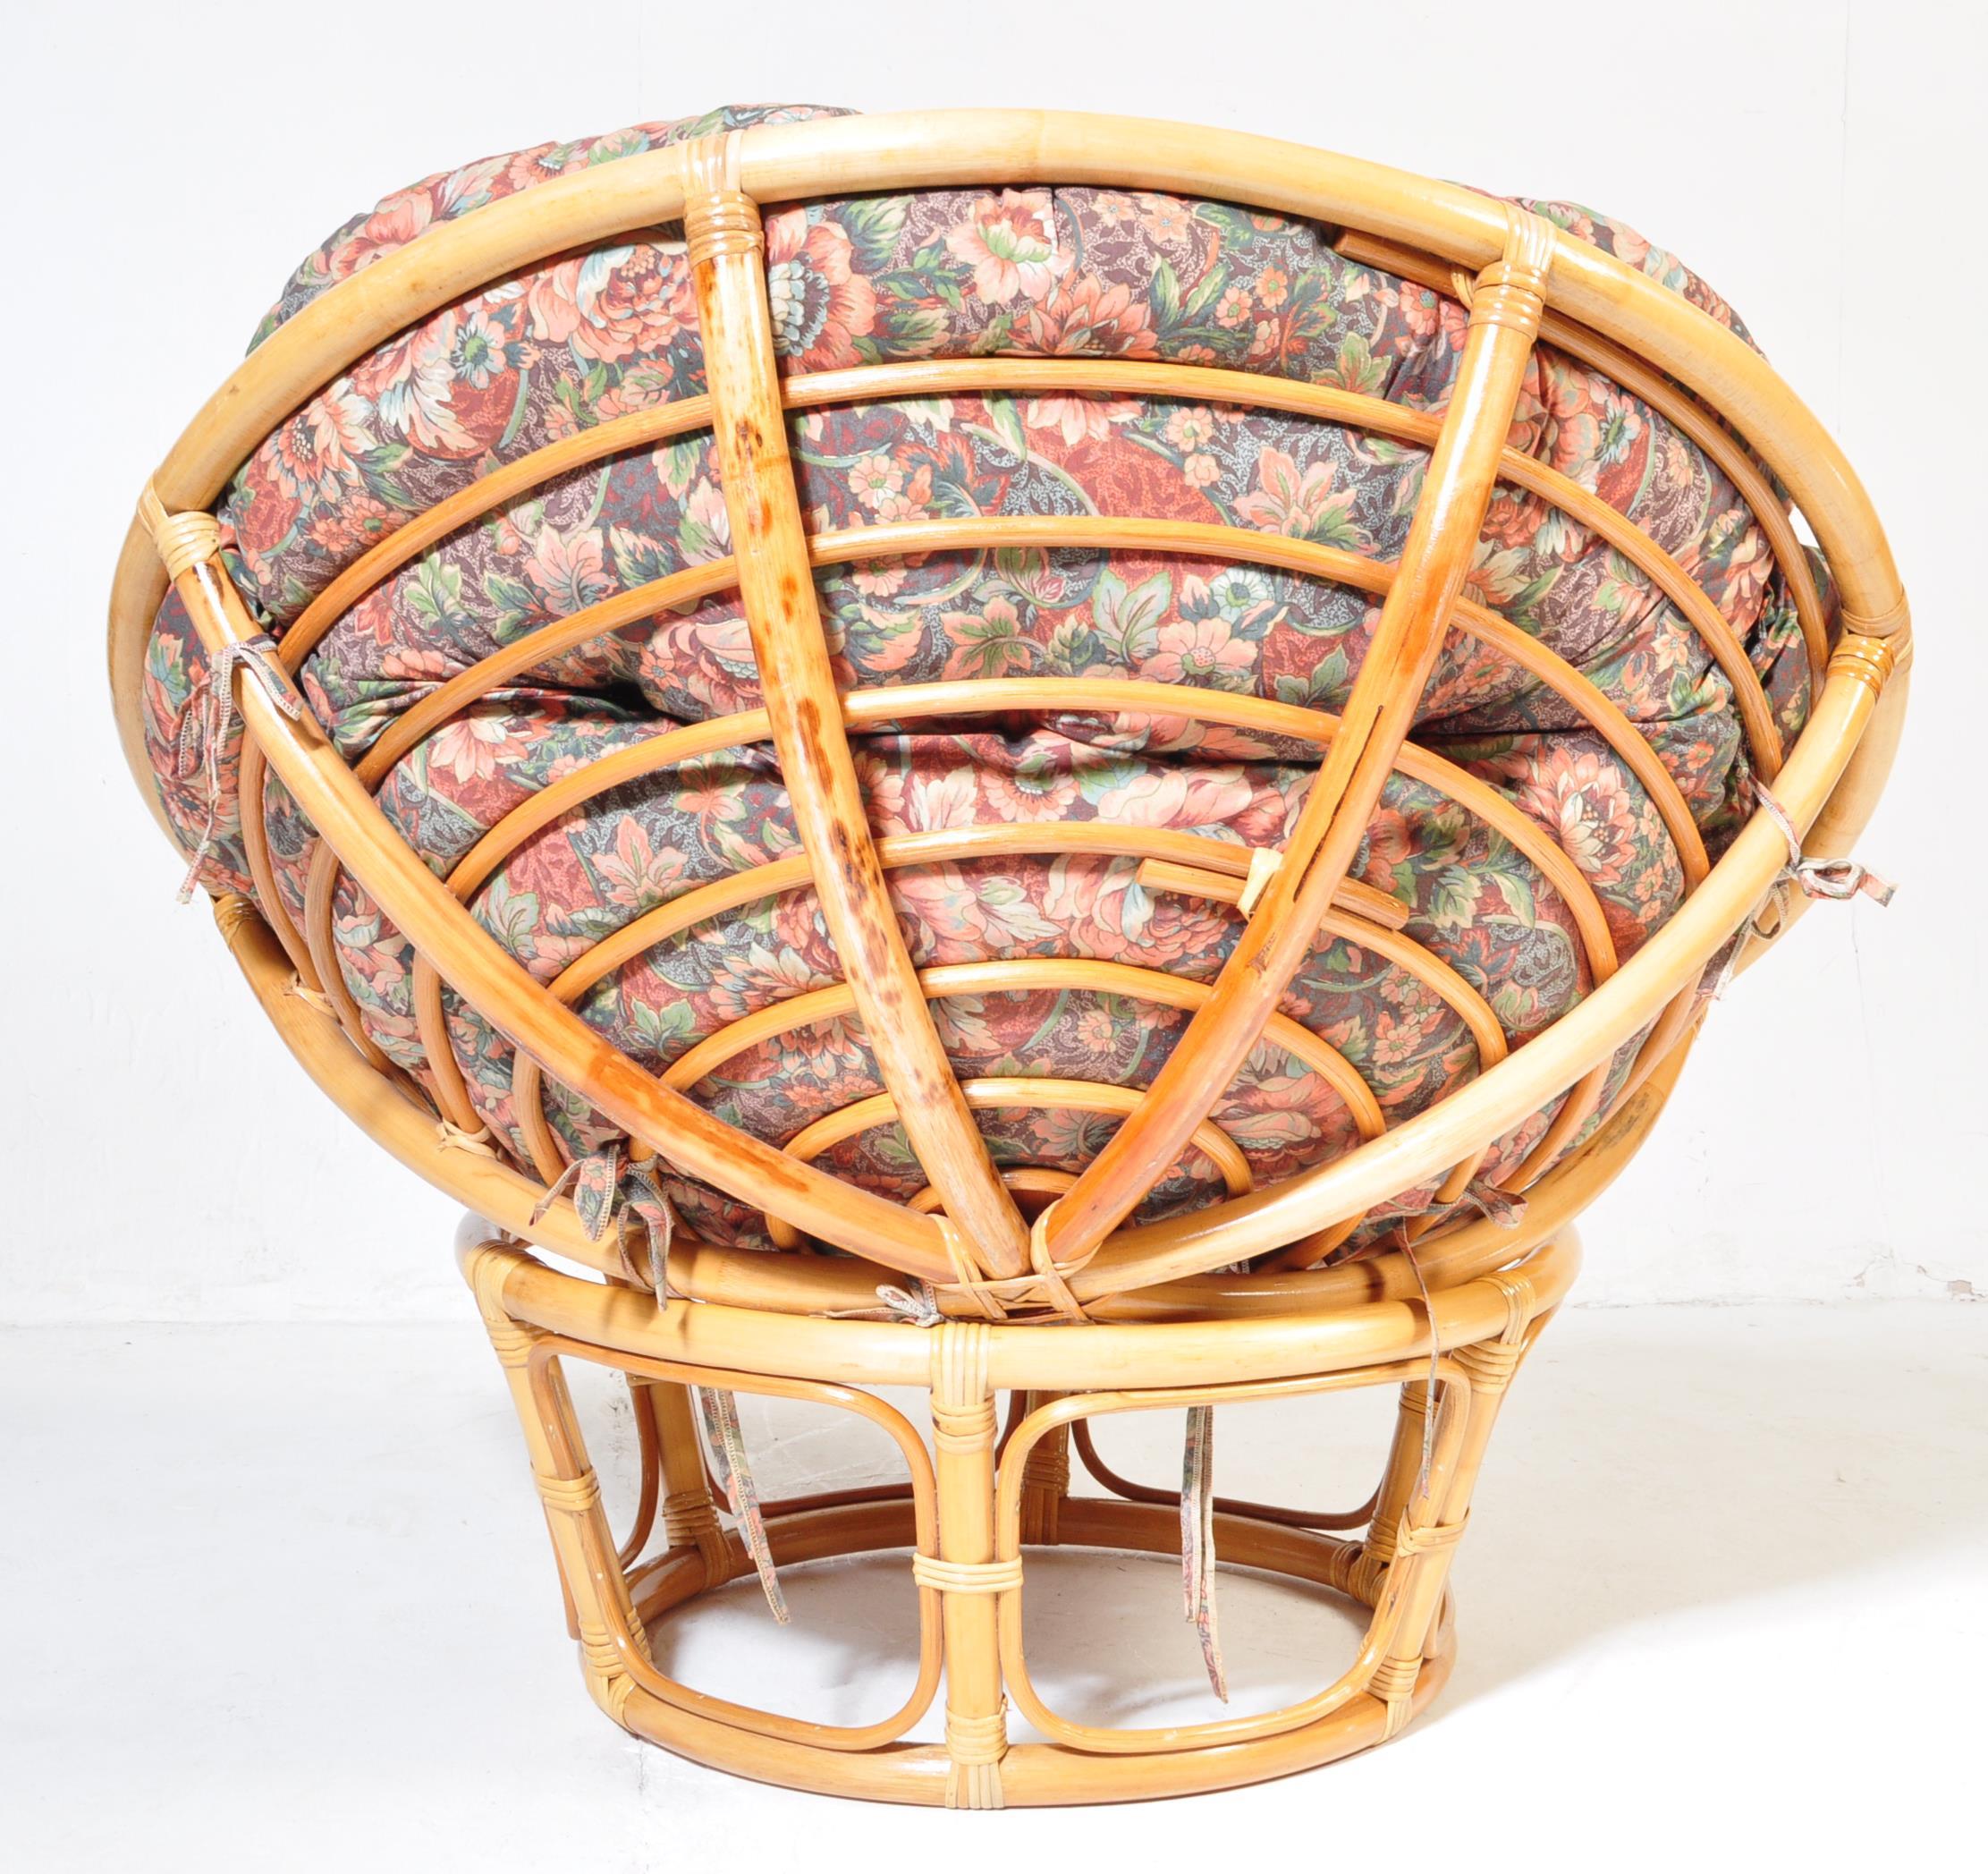 20TH CENTURY RETRO BAMBOO & RATTAN WEAVE EGG CHAIR - Image 4 of 4